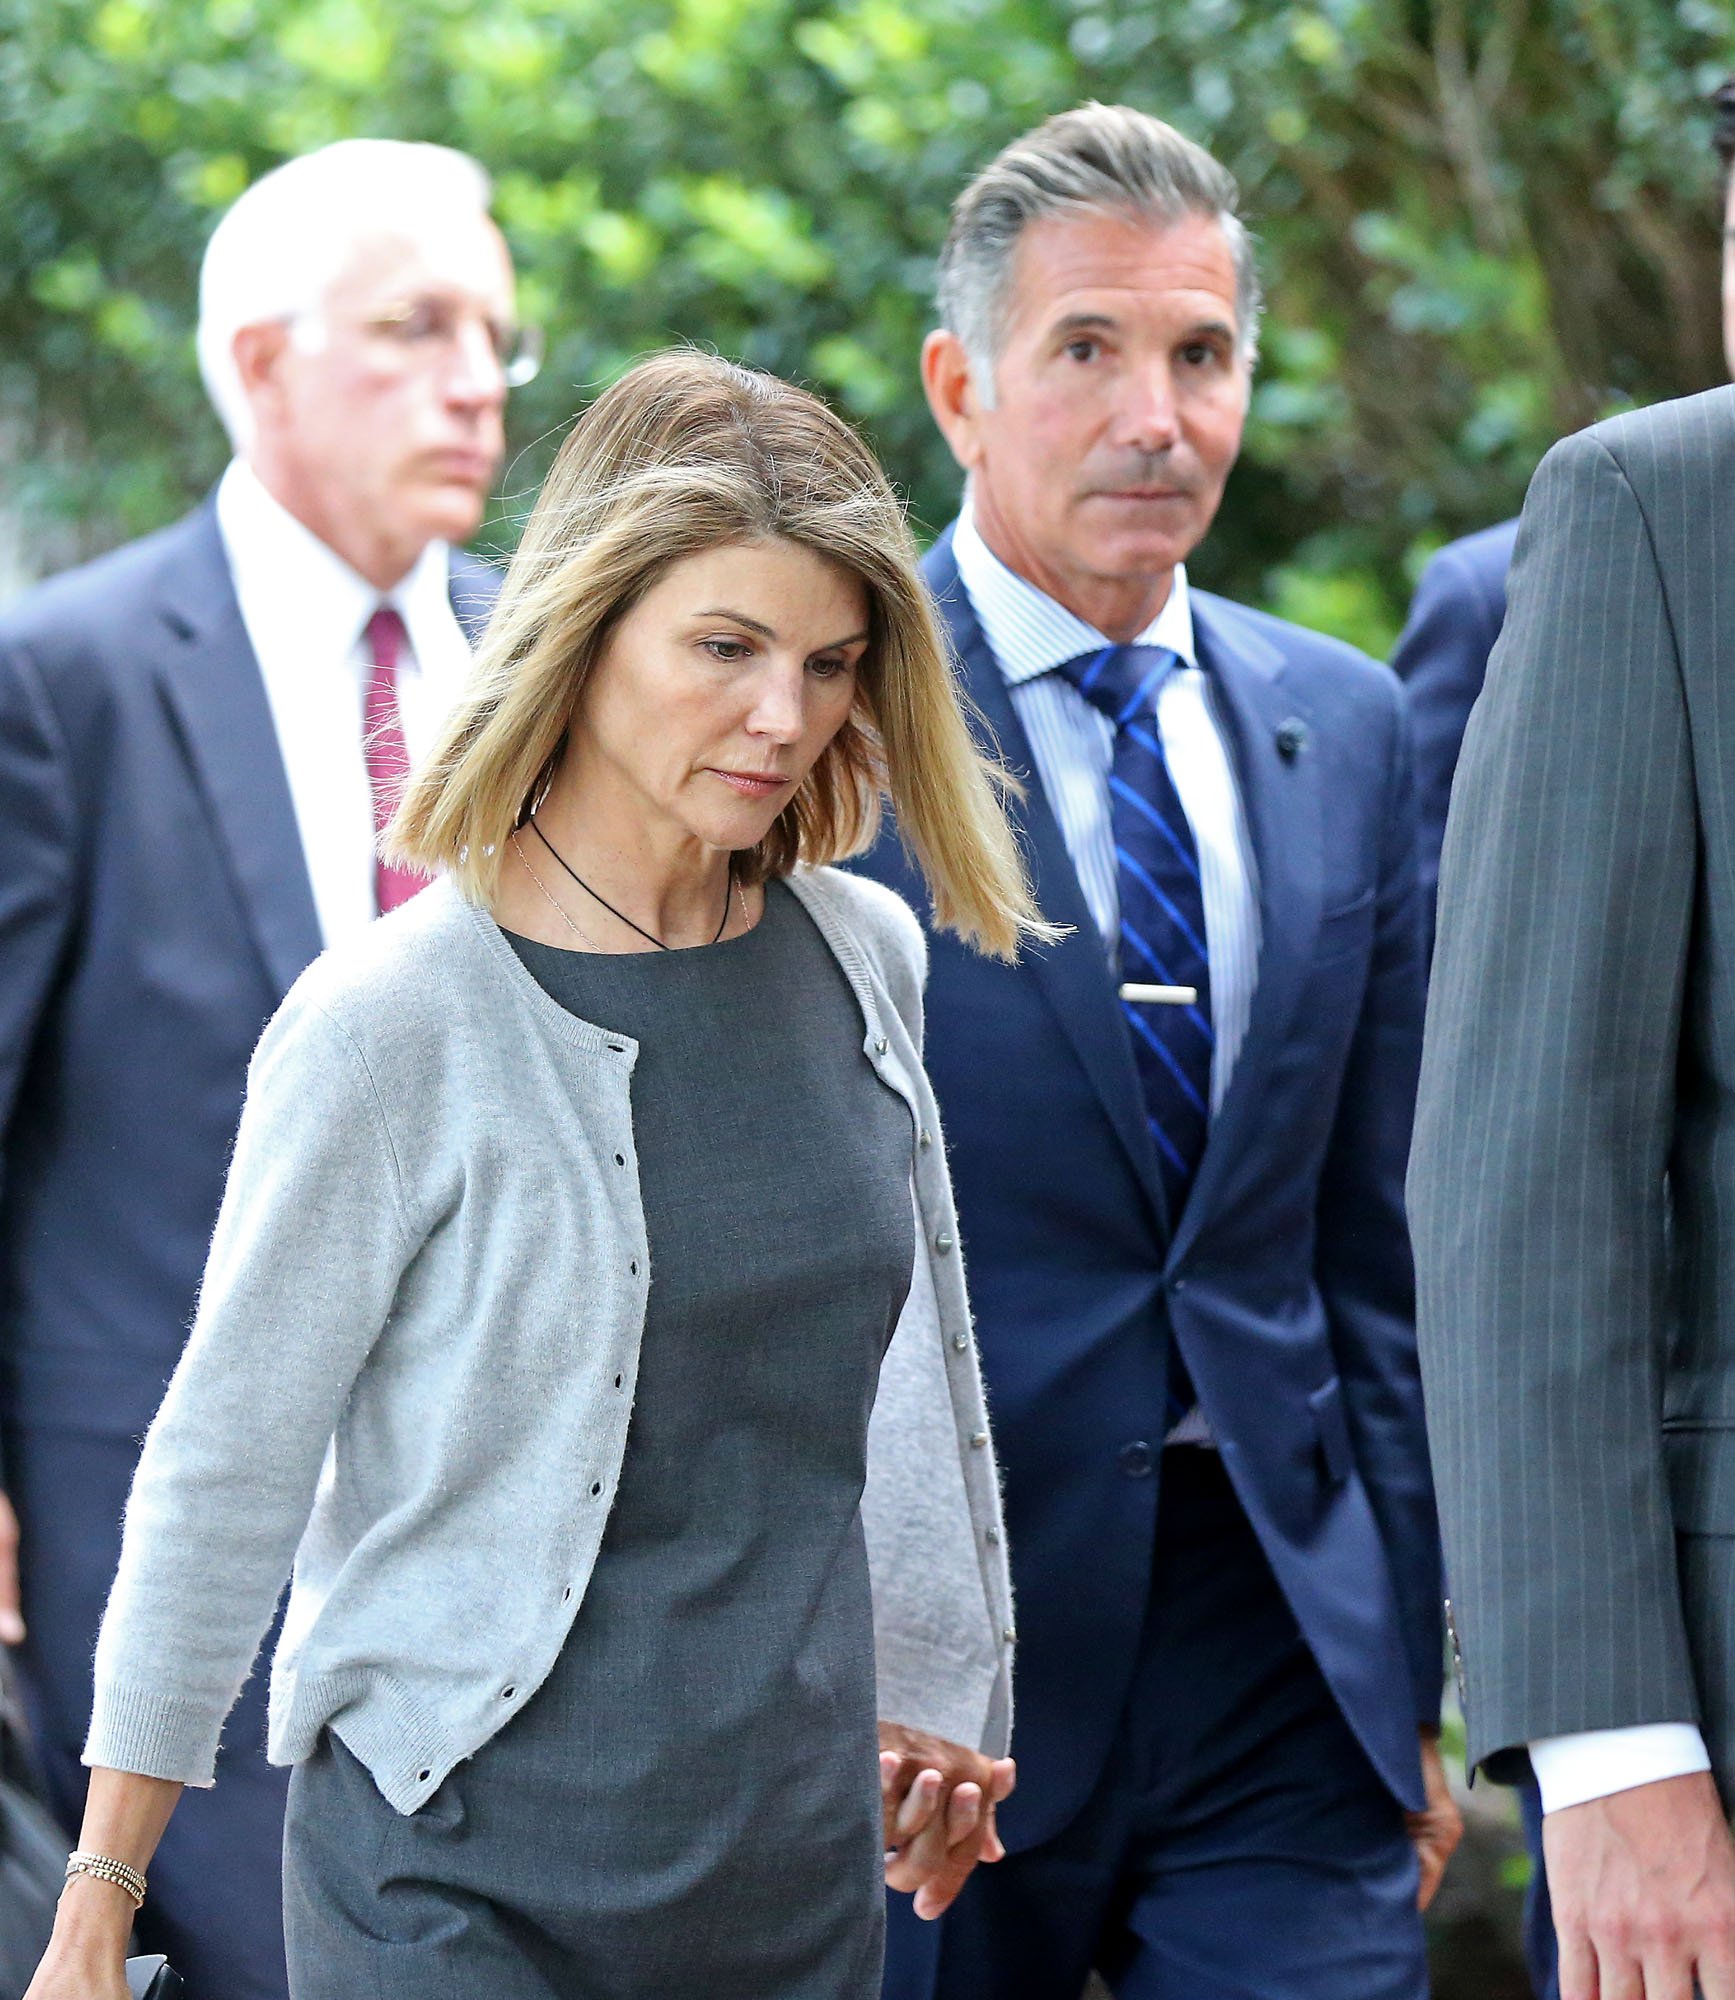 Mossimo Giannulli and Lori Loughlin leaving the courthouse after their hearing on 27 August, 2020. | Photo: Getty Images.